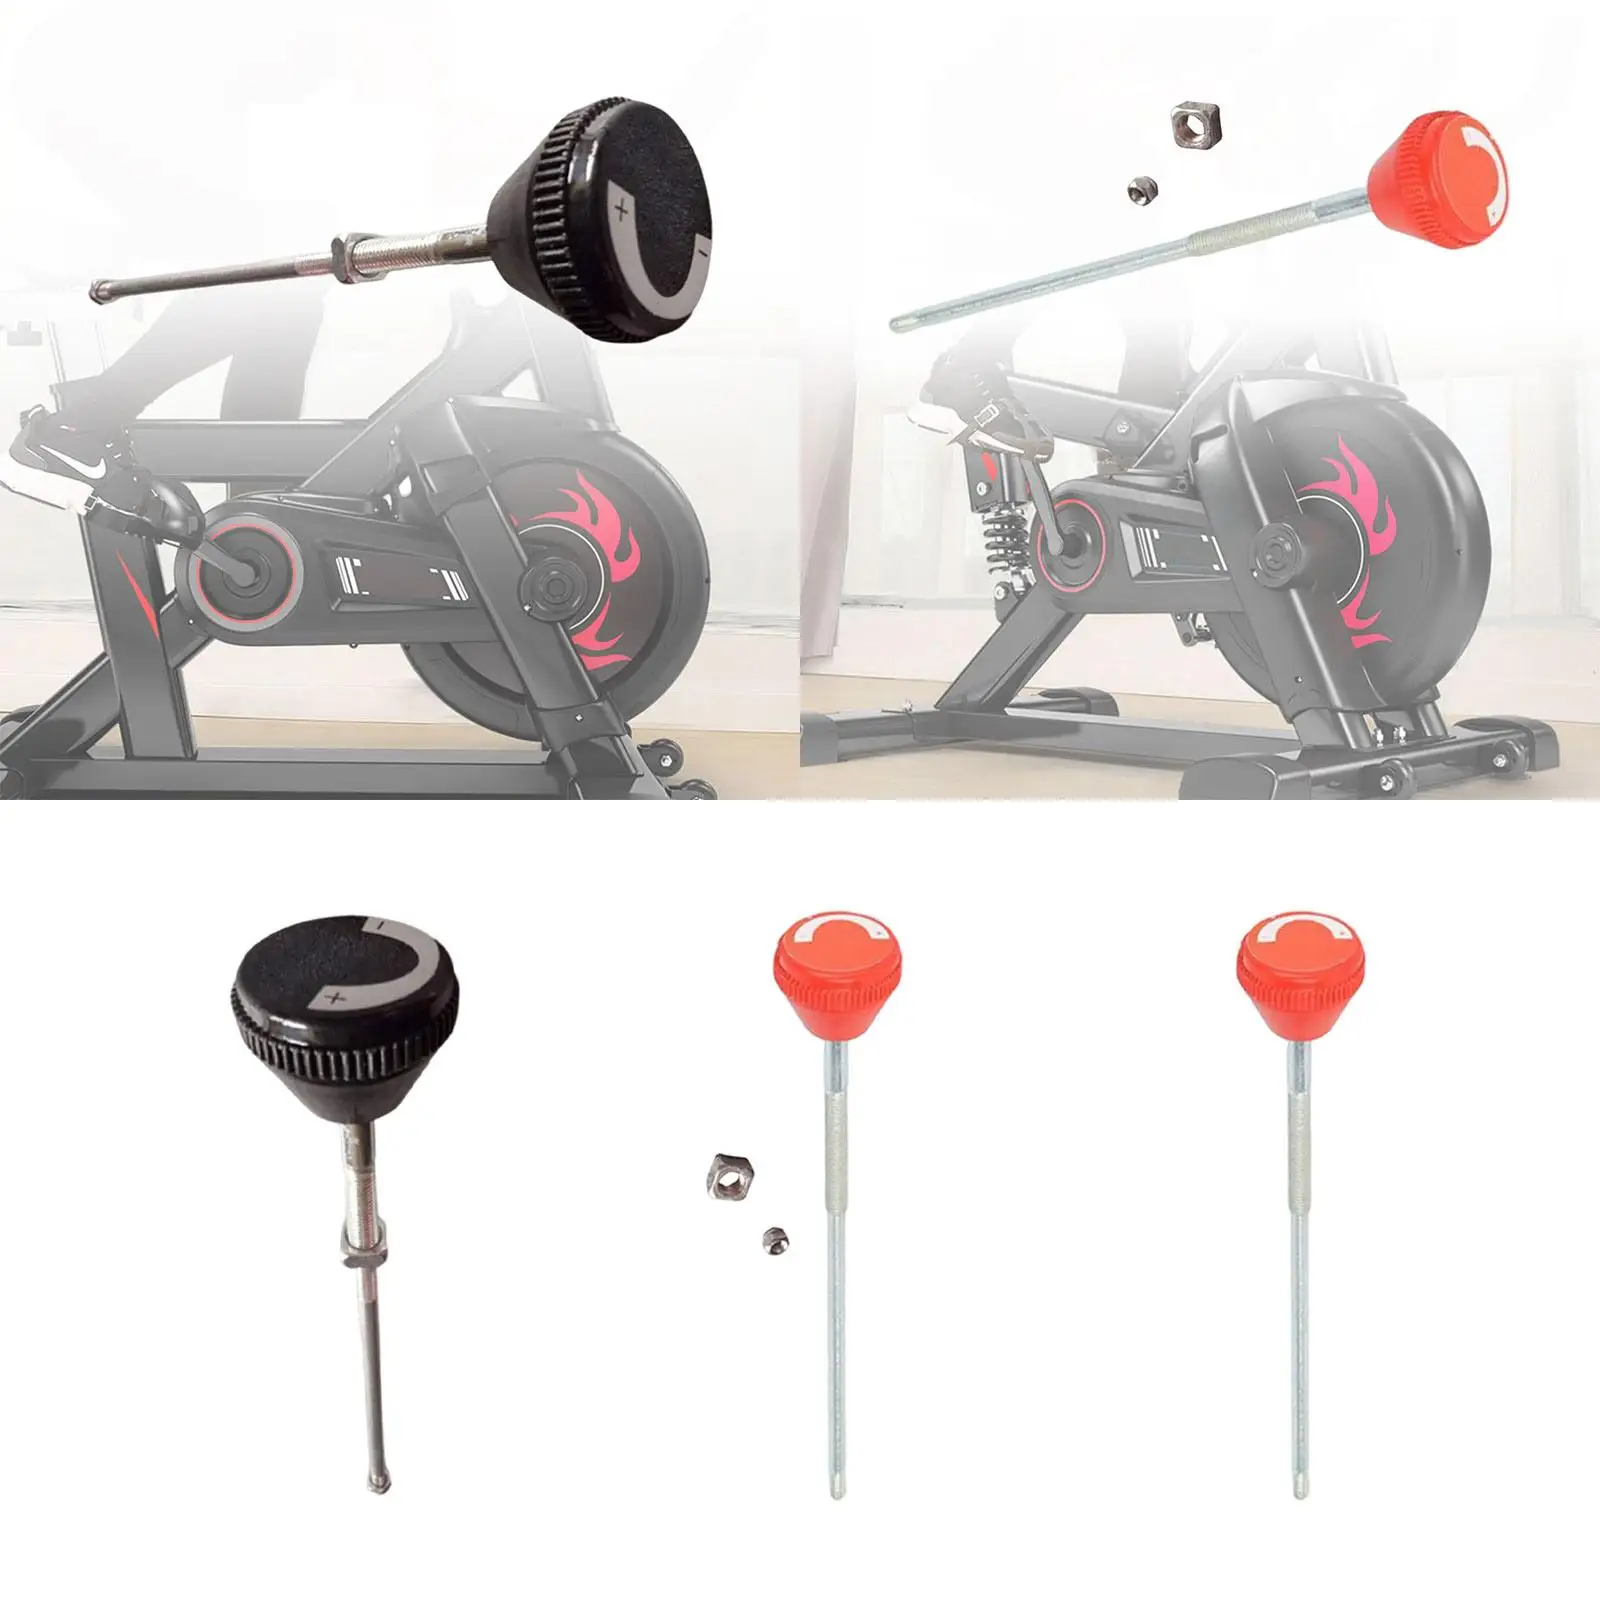 Adjustment Knob Assembly Accessories for Exercise Bike Exercise Machines Gym